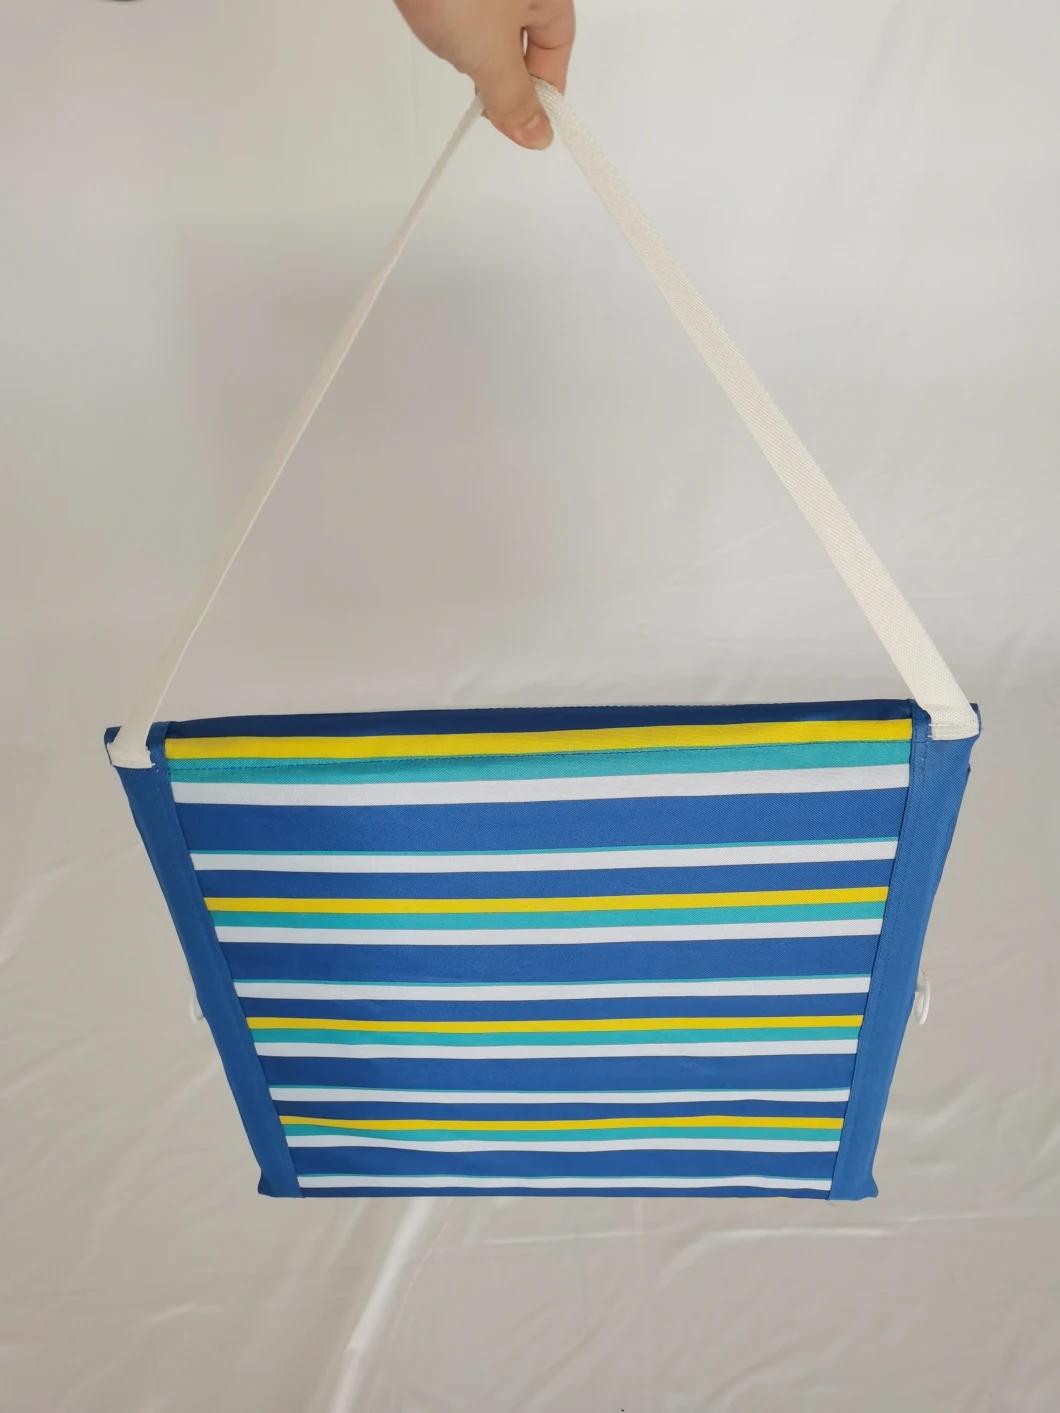 China Manufacturing Foldable Beach Chair Standard or Customization Allowed